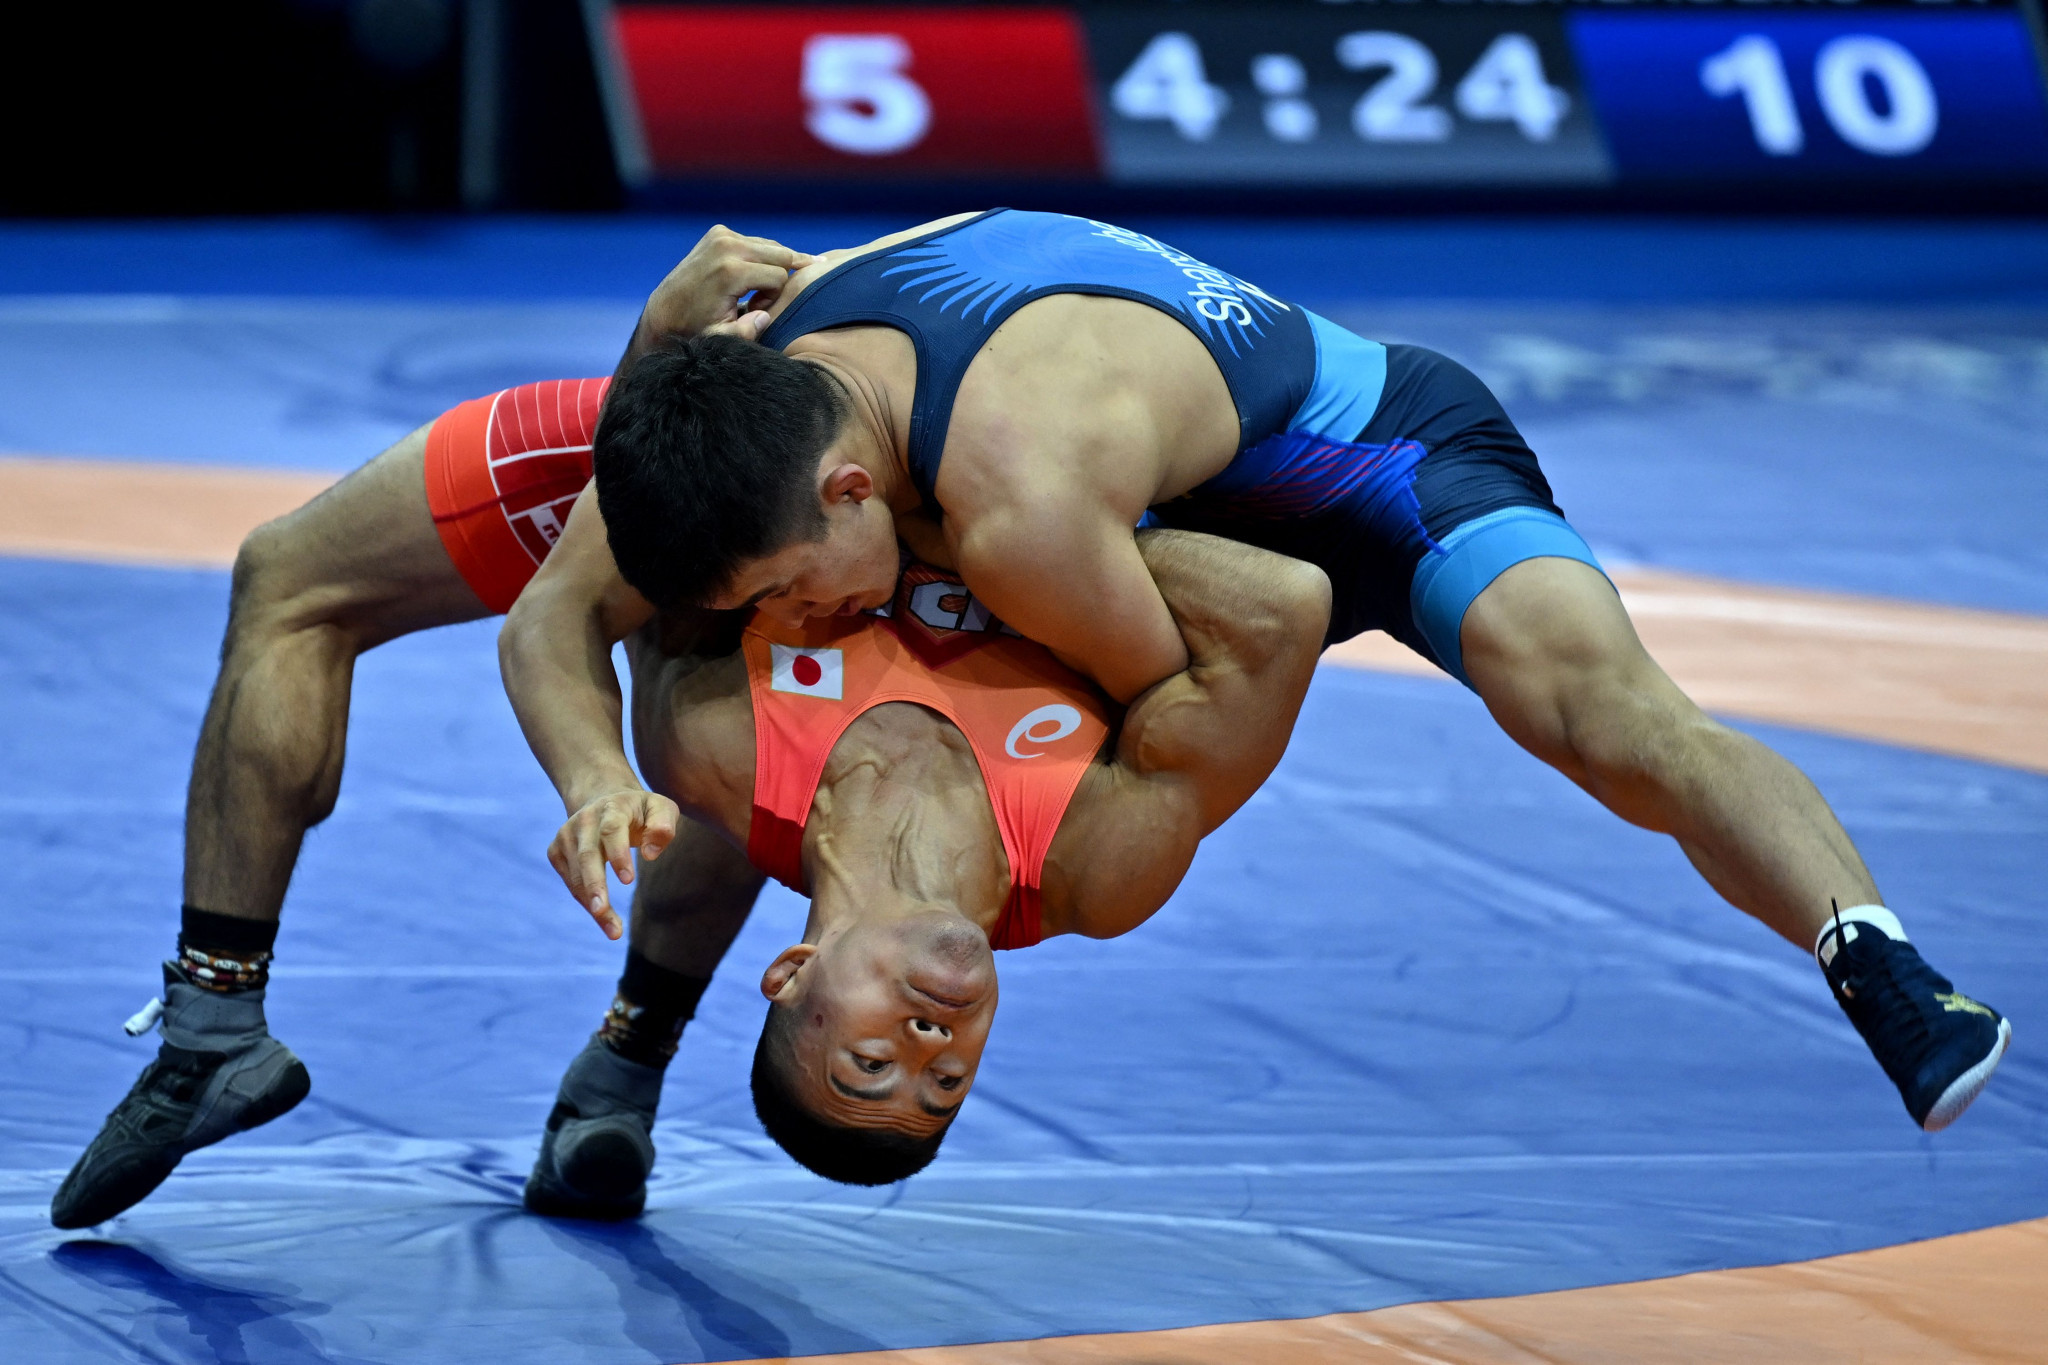 Zholaman Sharshenbekov, in blue, on his way to winning men's 60kg gold at the World Wrestling Championships ©Getty Images